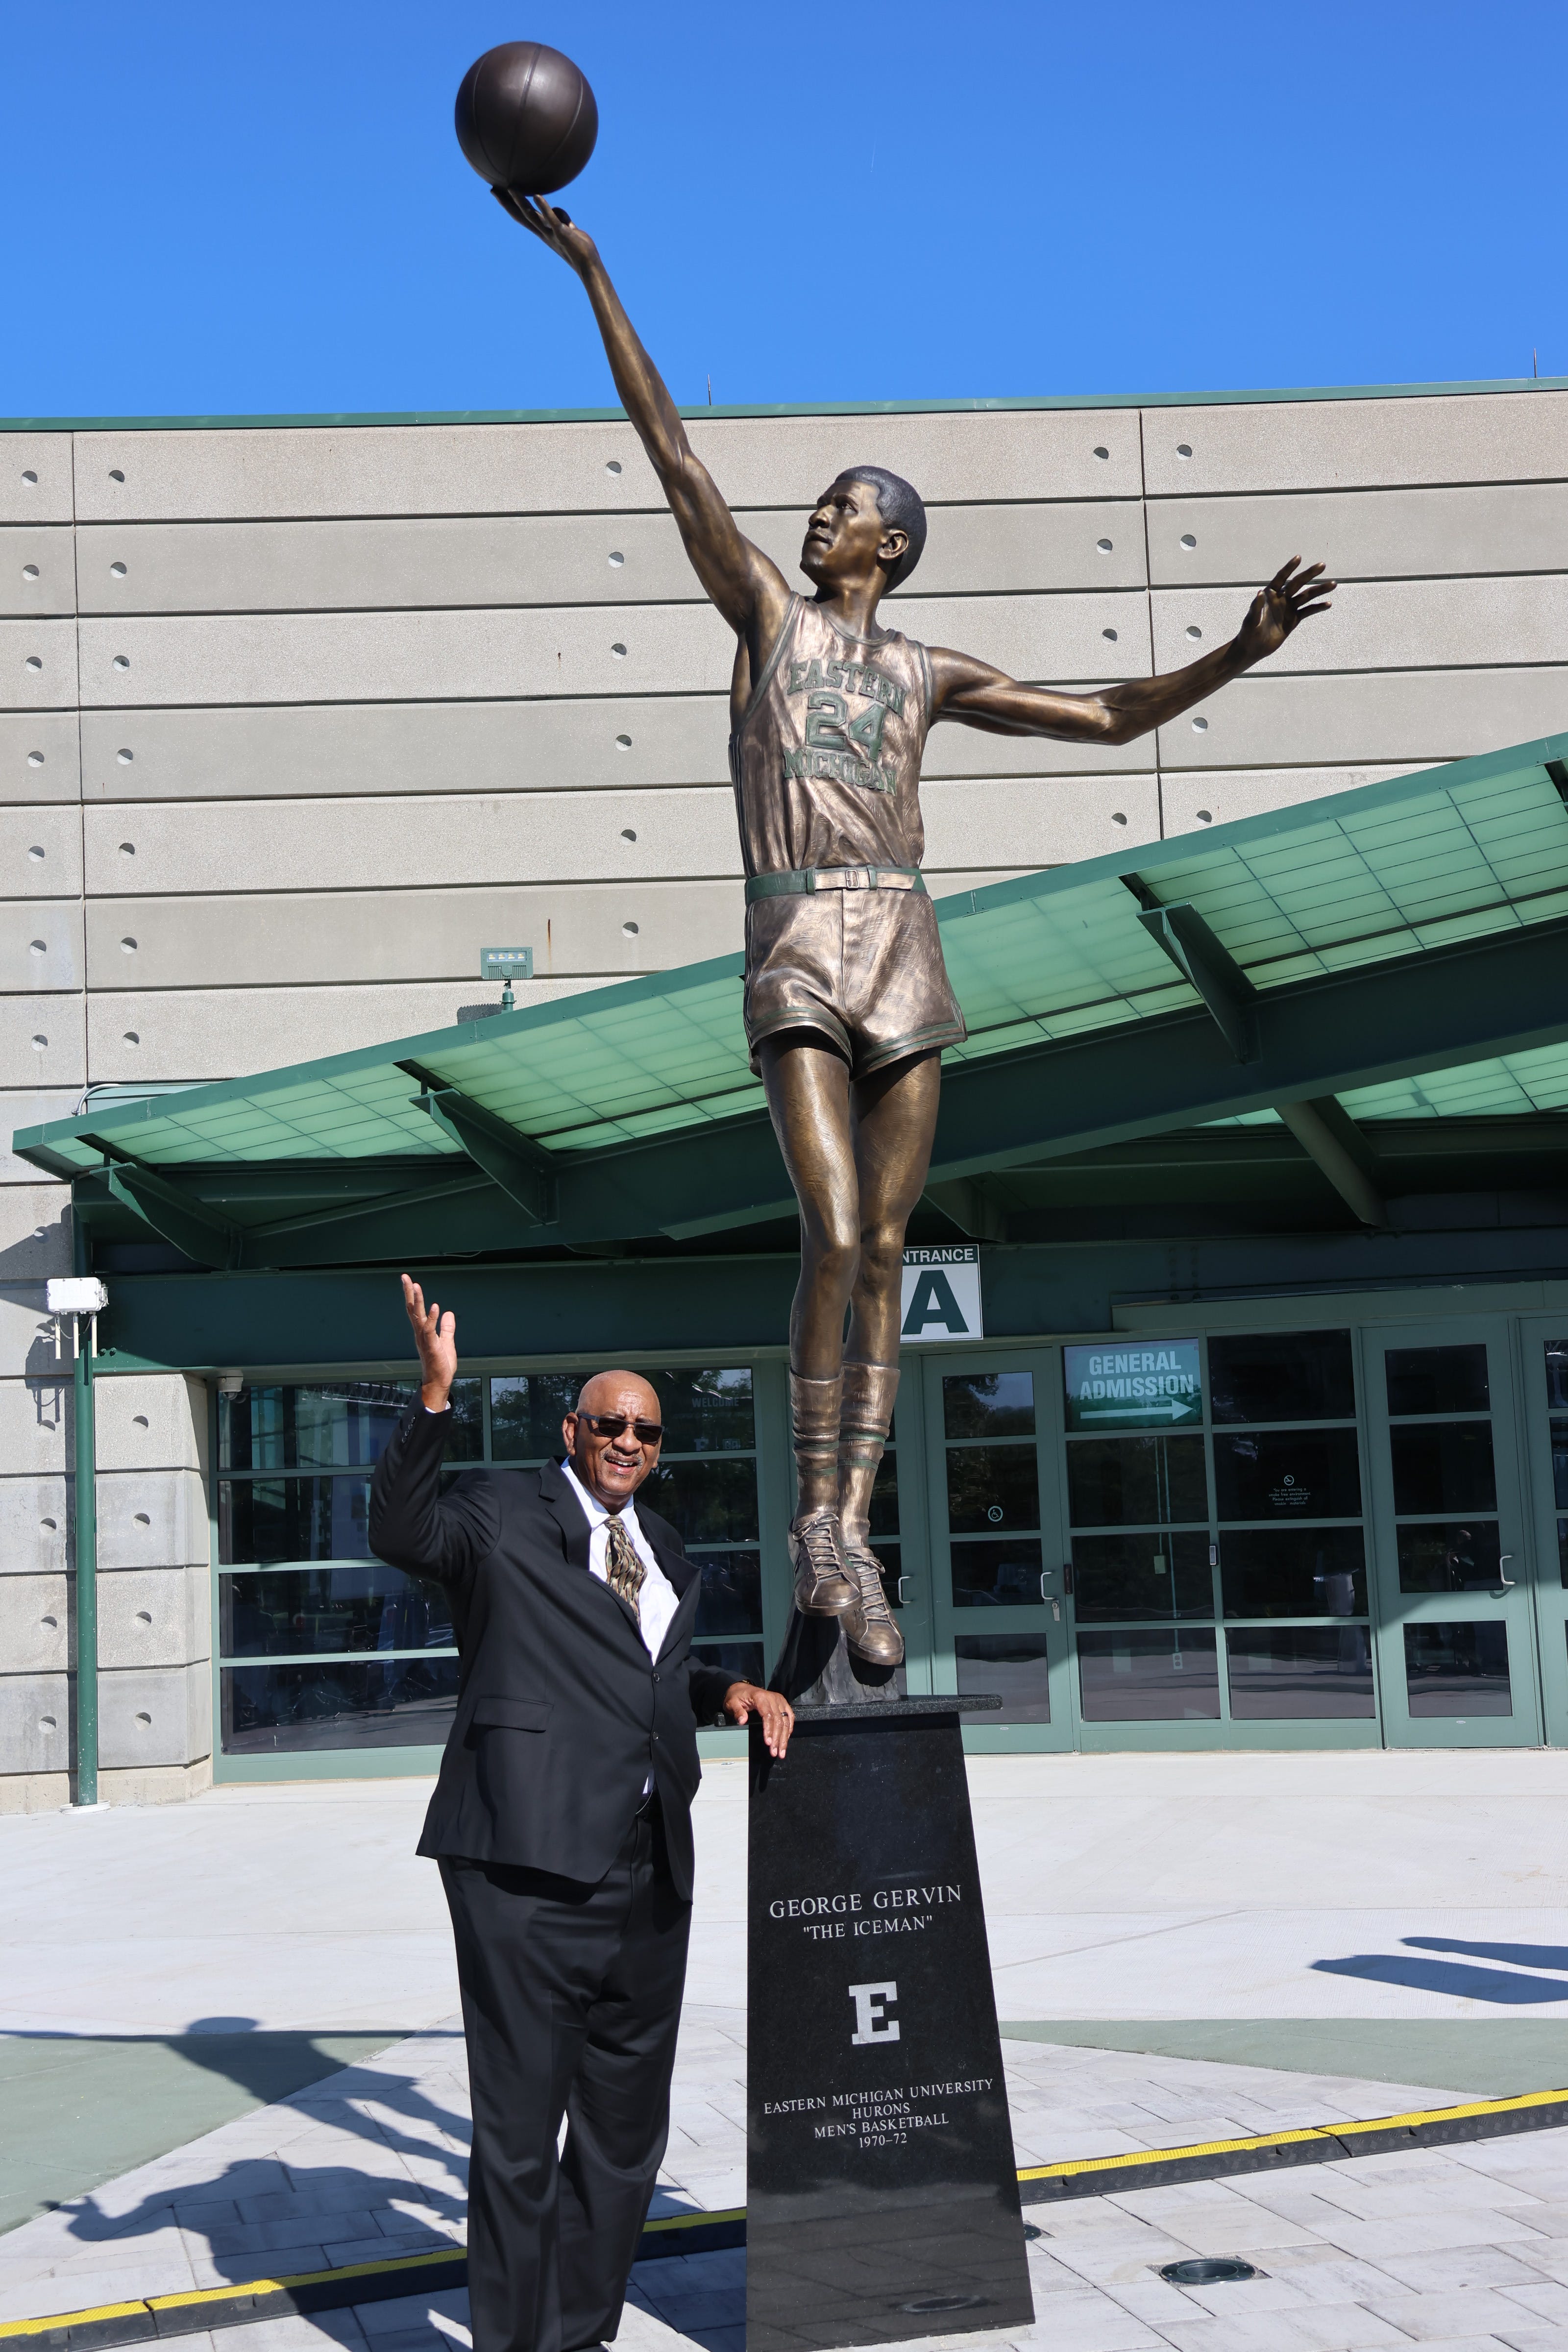 George Gervin statue unveiled at Eastern Michigan University